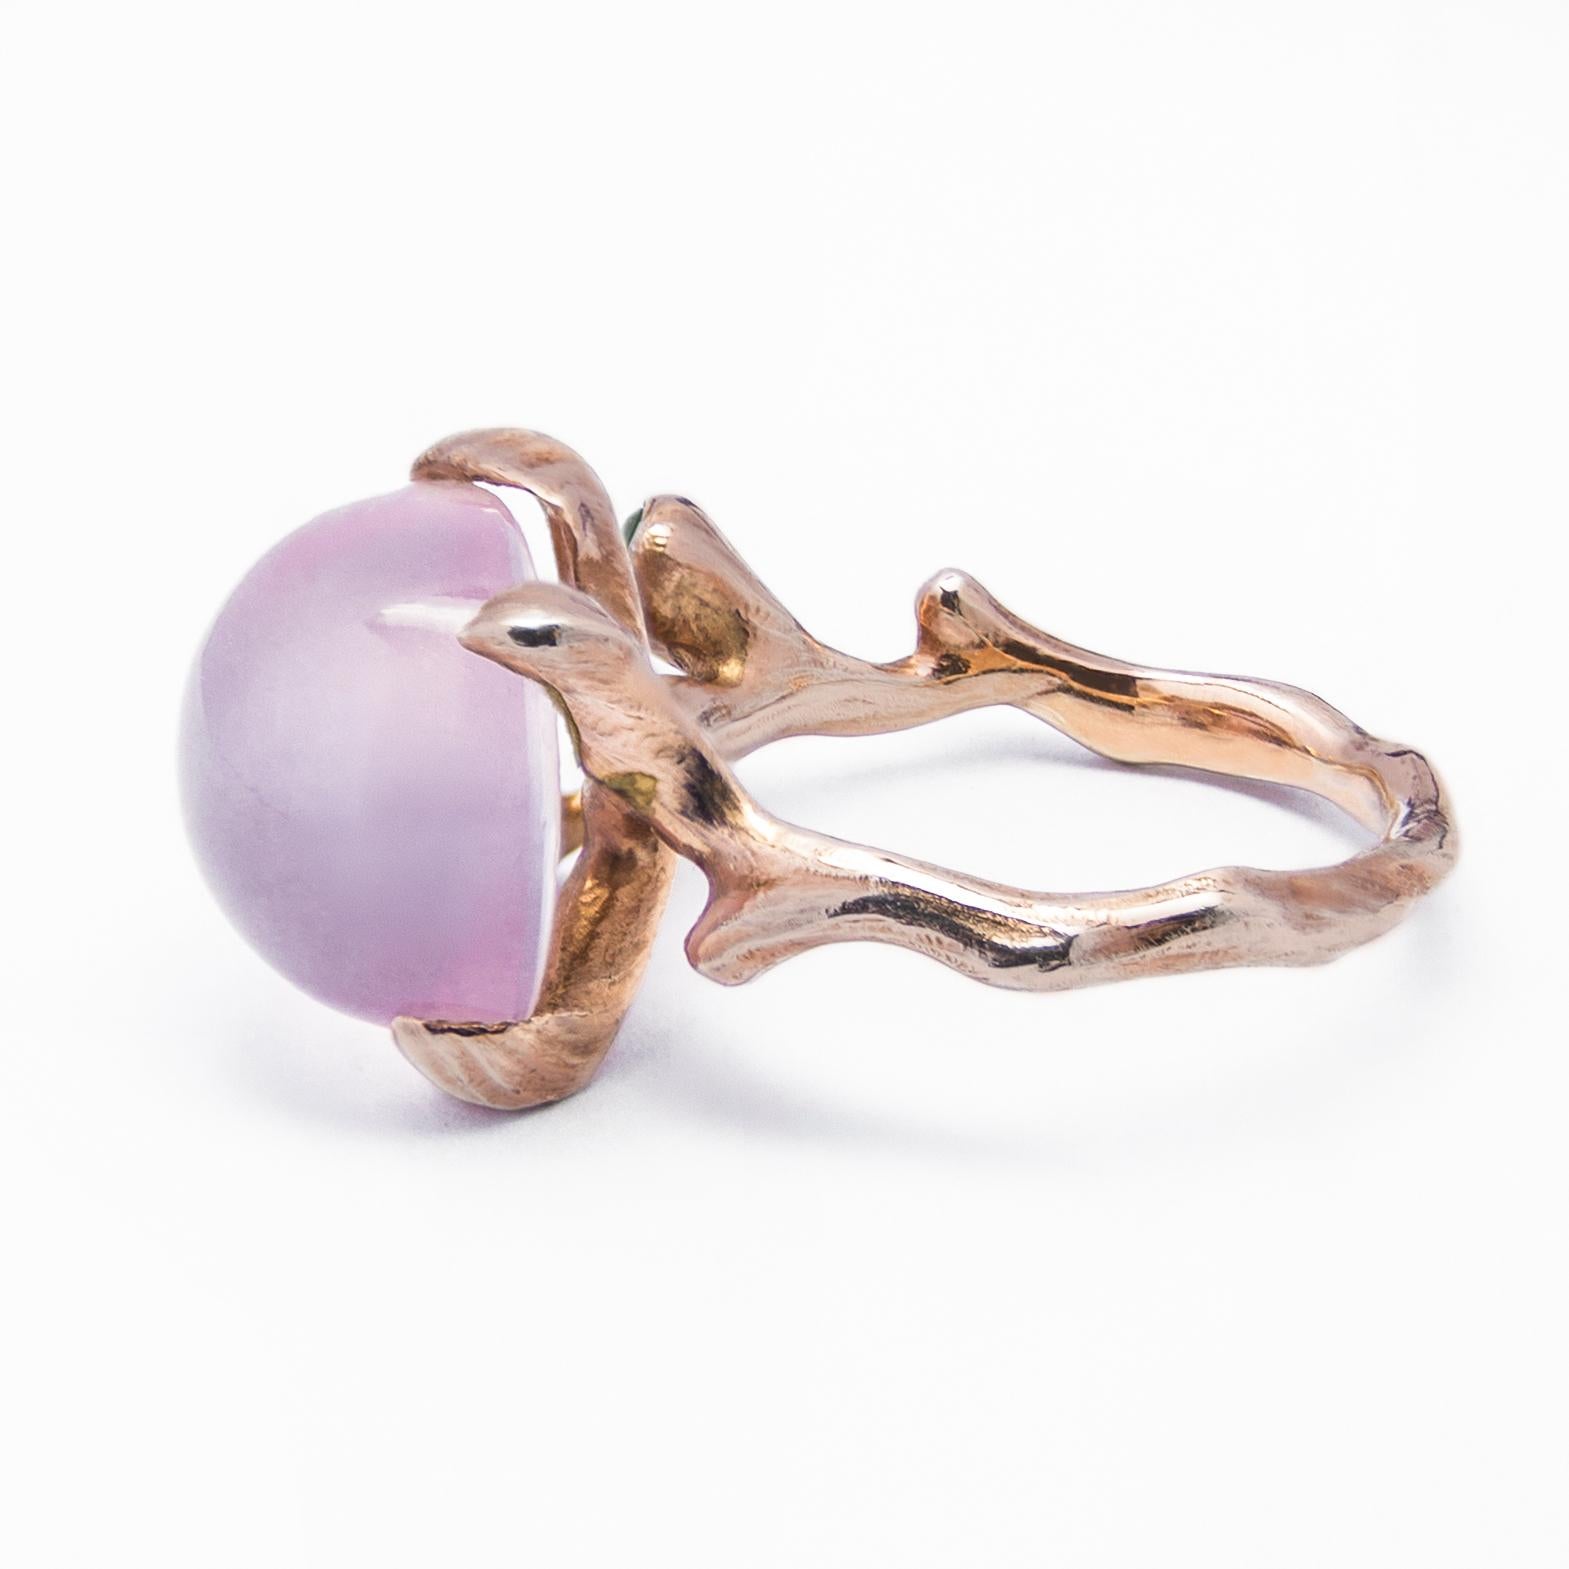 This 18K Rose Gold ring from the Kara collection is crafted at the TVRRINI studio and features a 10.1-carat square Rose Quartz cabochon and round-faceted Emerald. The design is inspired by fruit growing on a tree. Rose Quartz is cut and mounted with